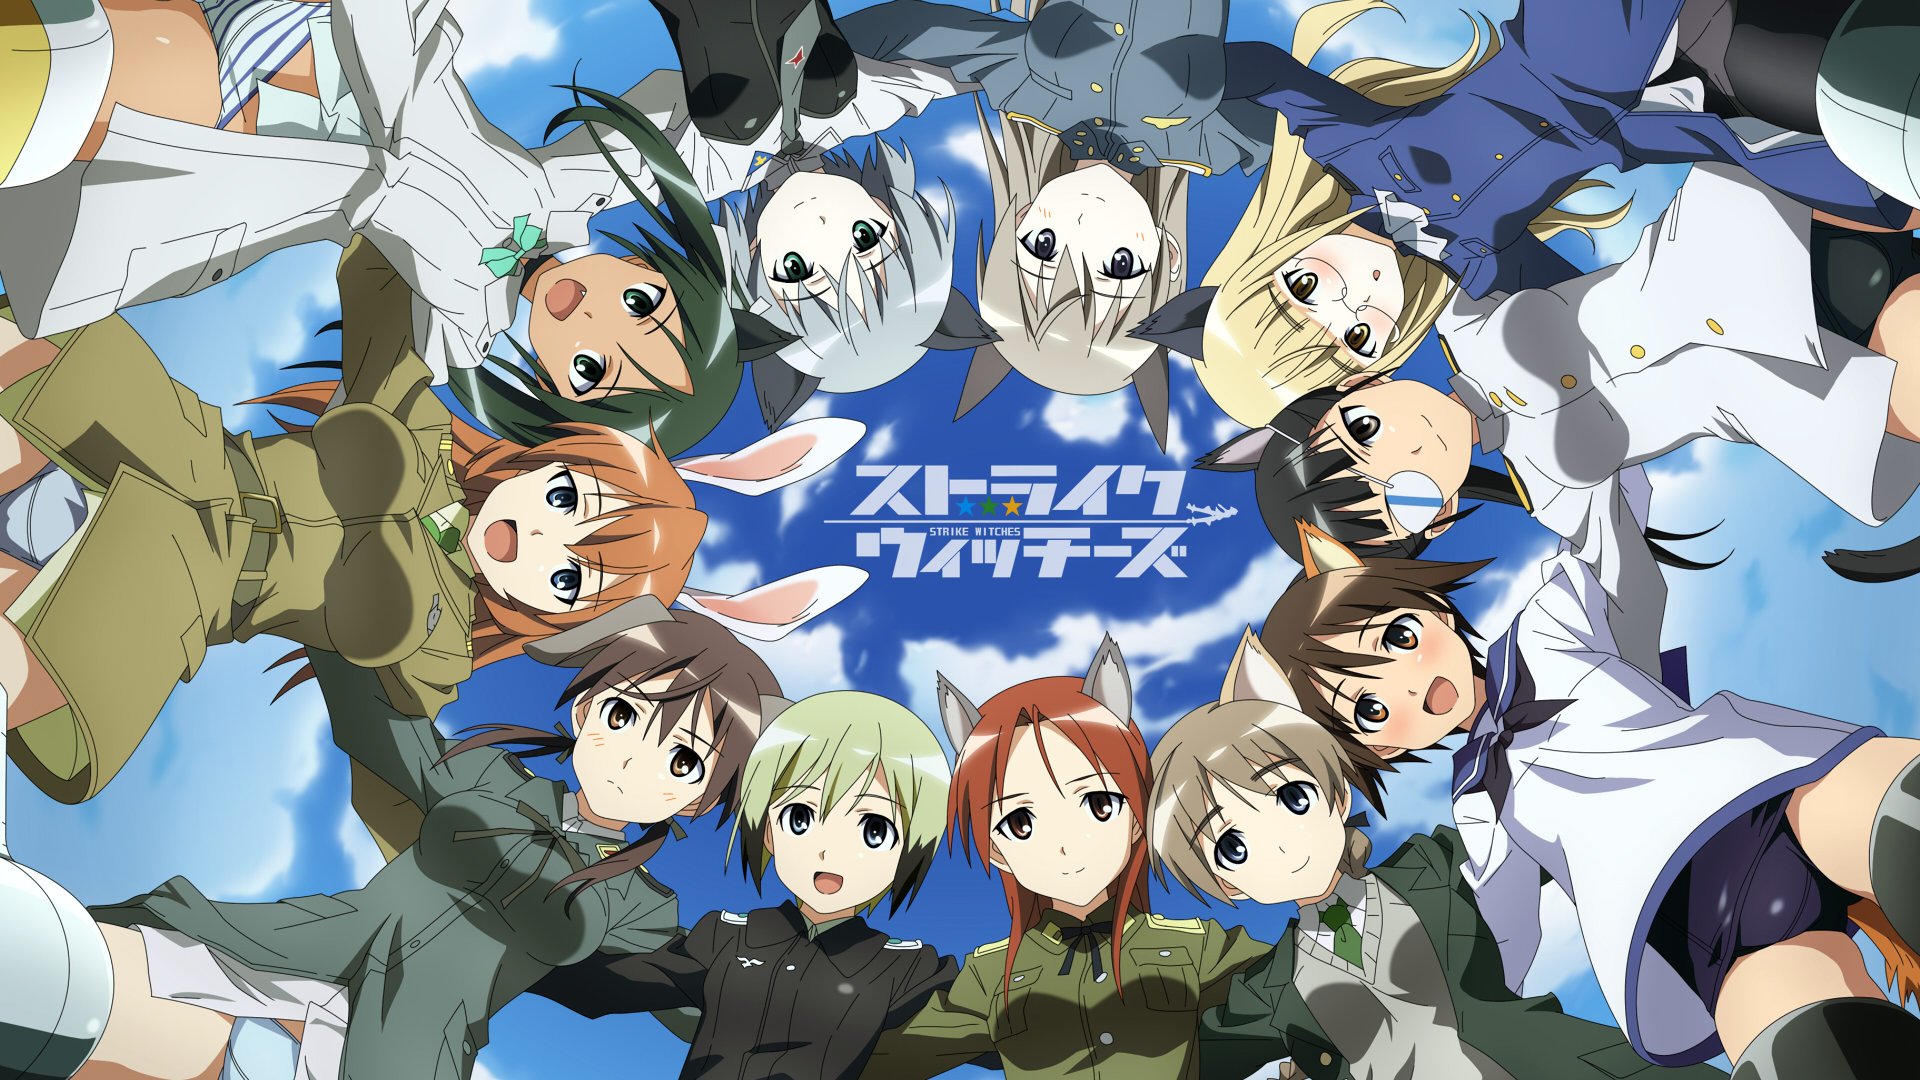 Strike Witches #9